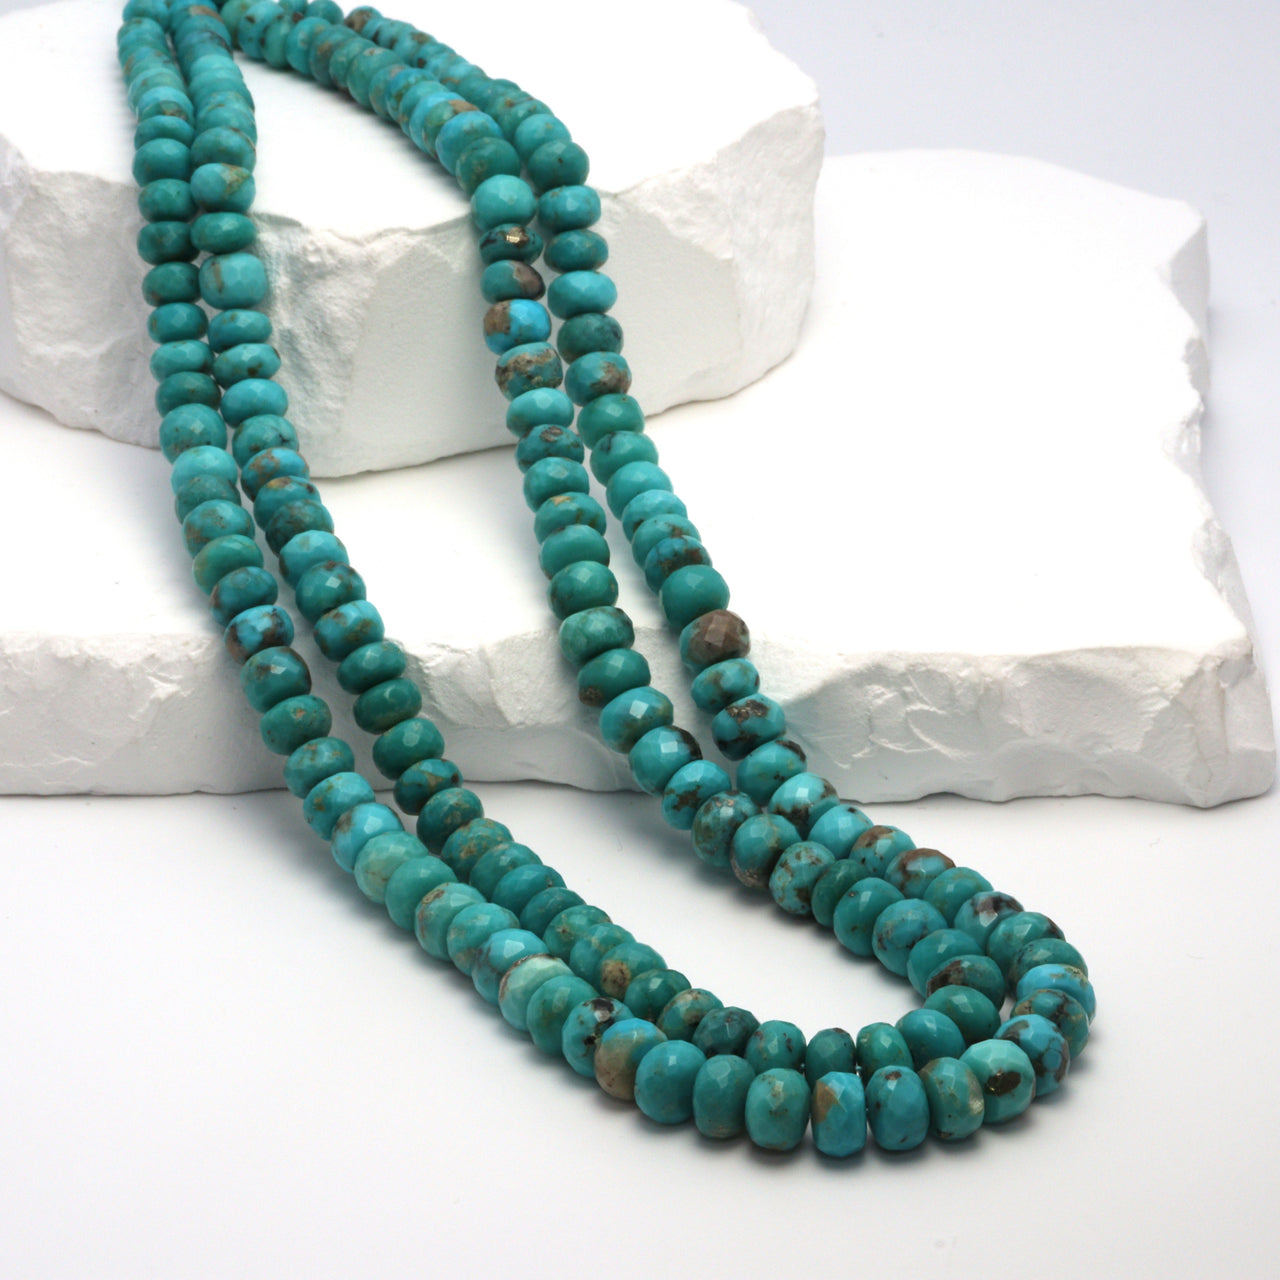 Natural Blue and Black Turquoise 6mm Faceted Rondelles